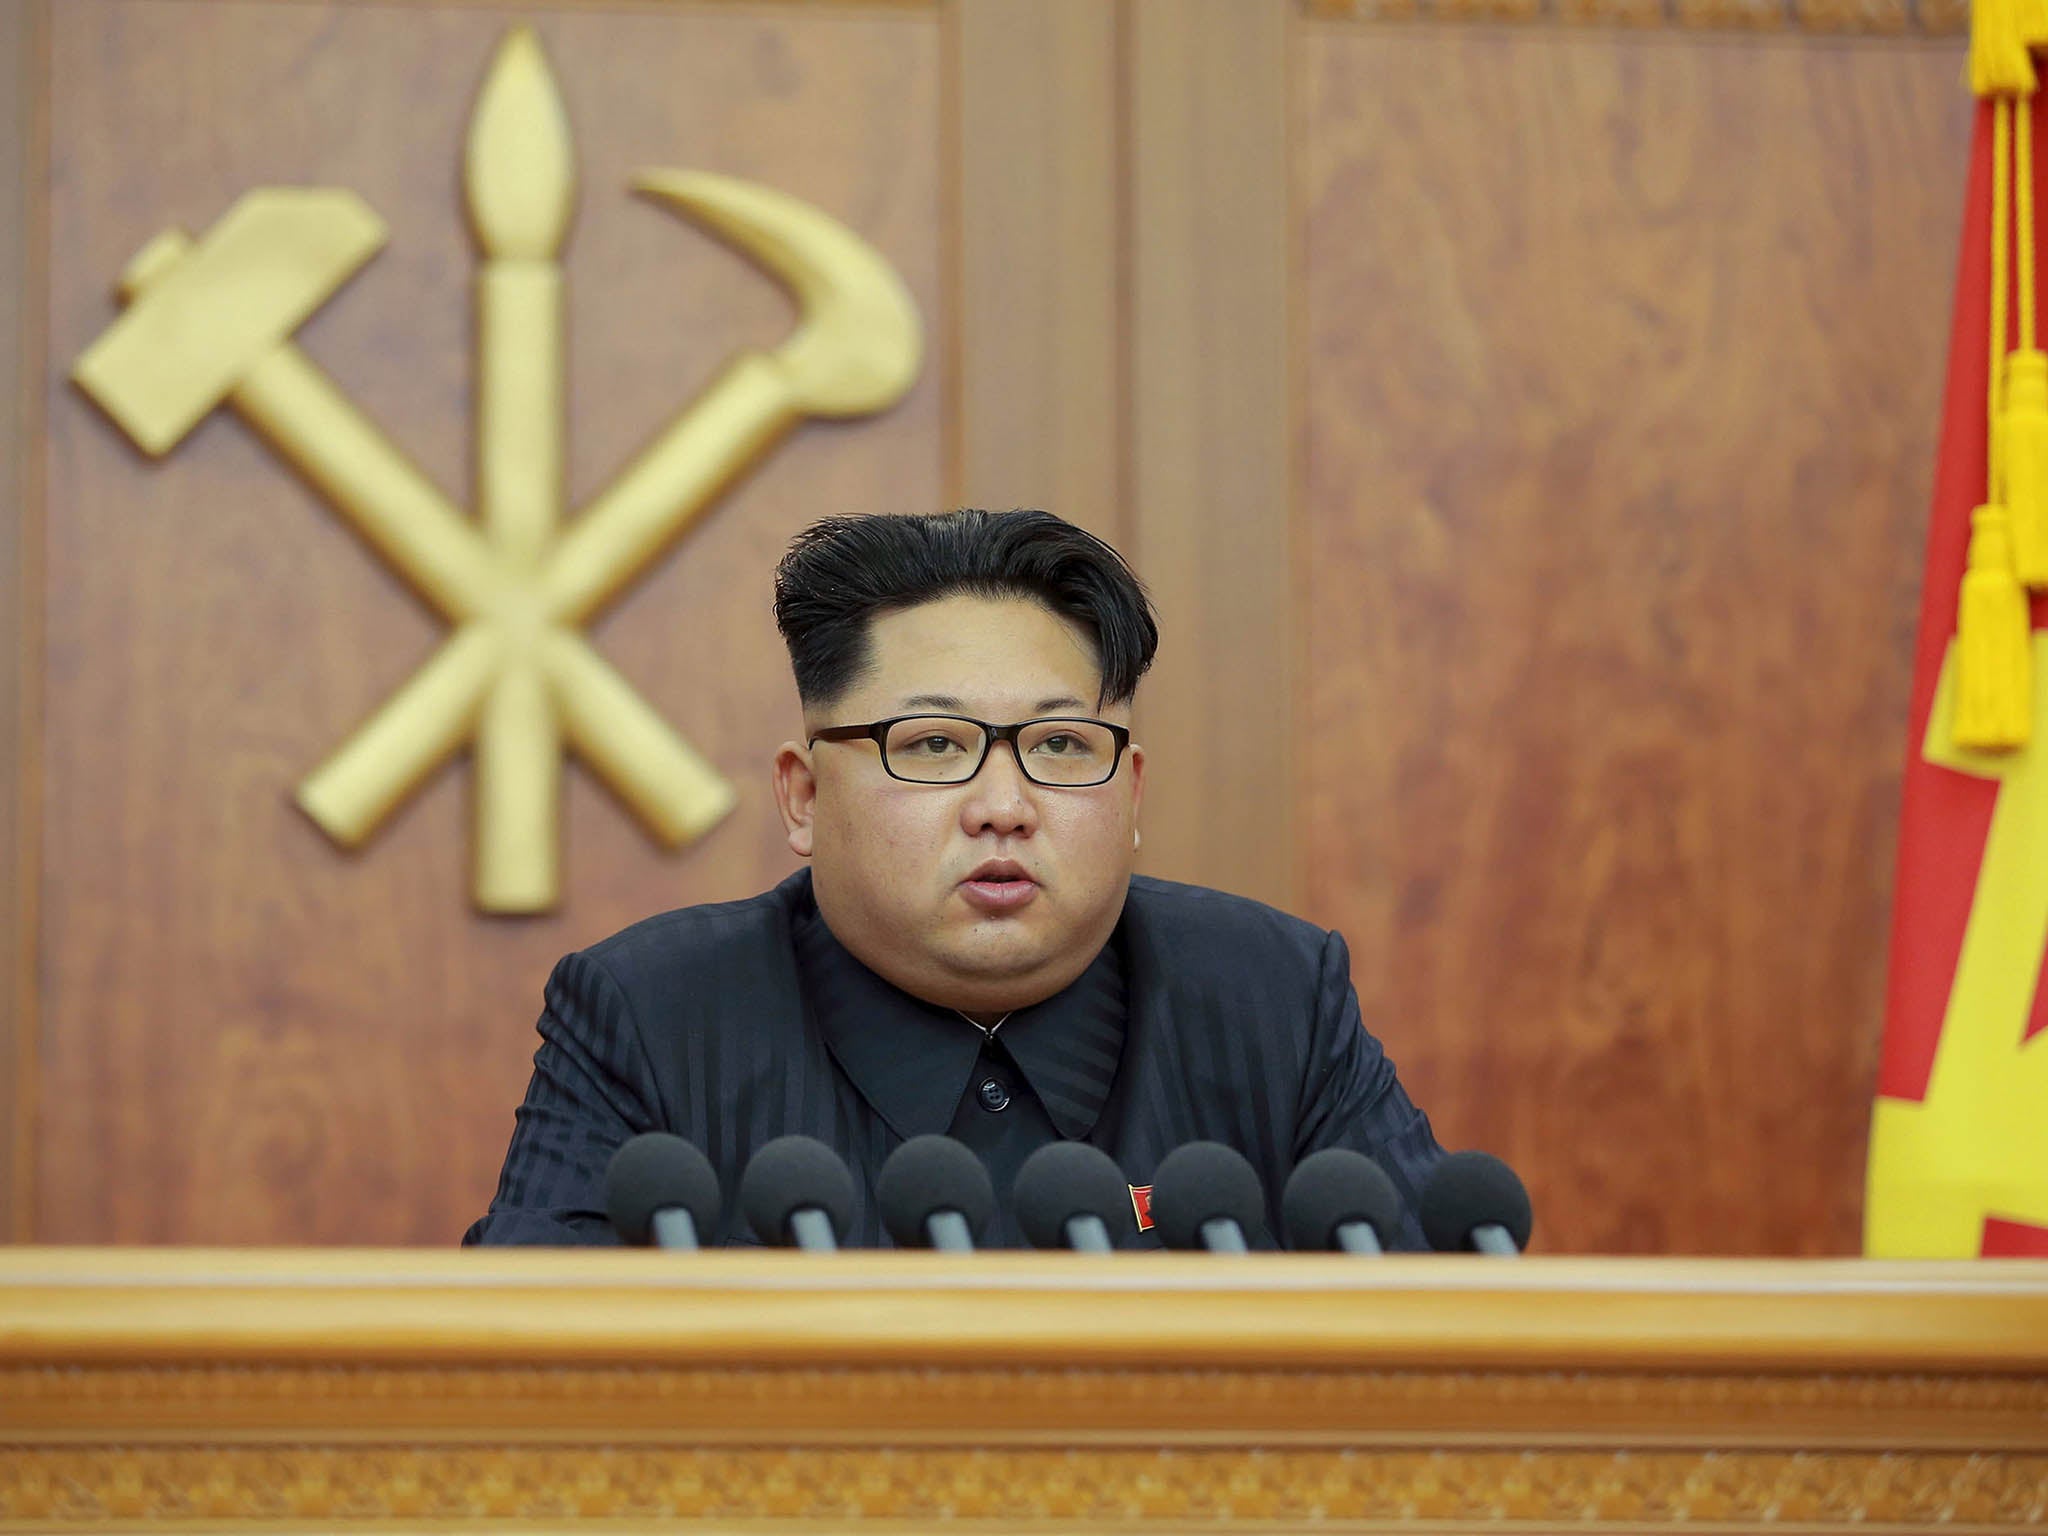 North Korean leader Kim Jong Un gives a New Year's address for 2016 in Pyongyang, in this undated photo released by Kyodo January 1, 2016.